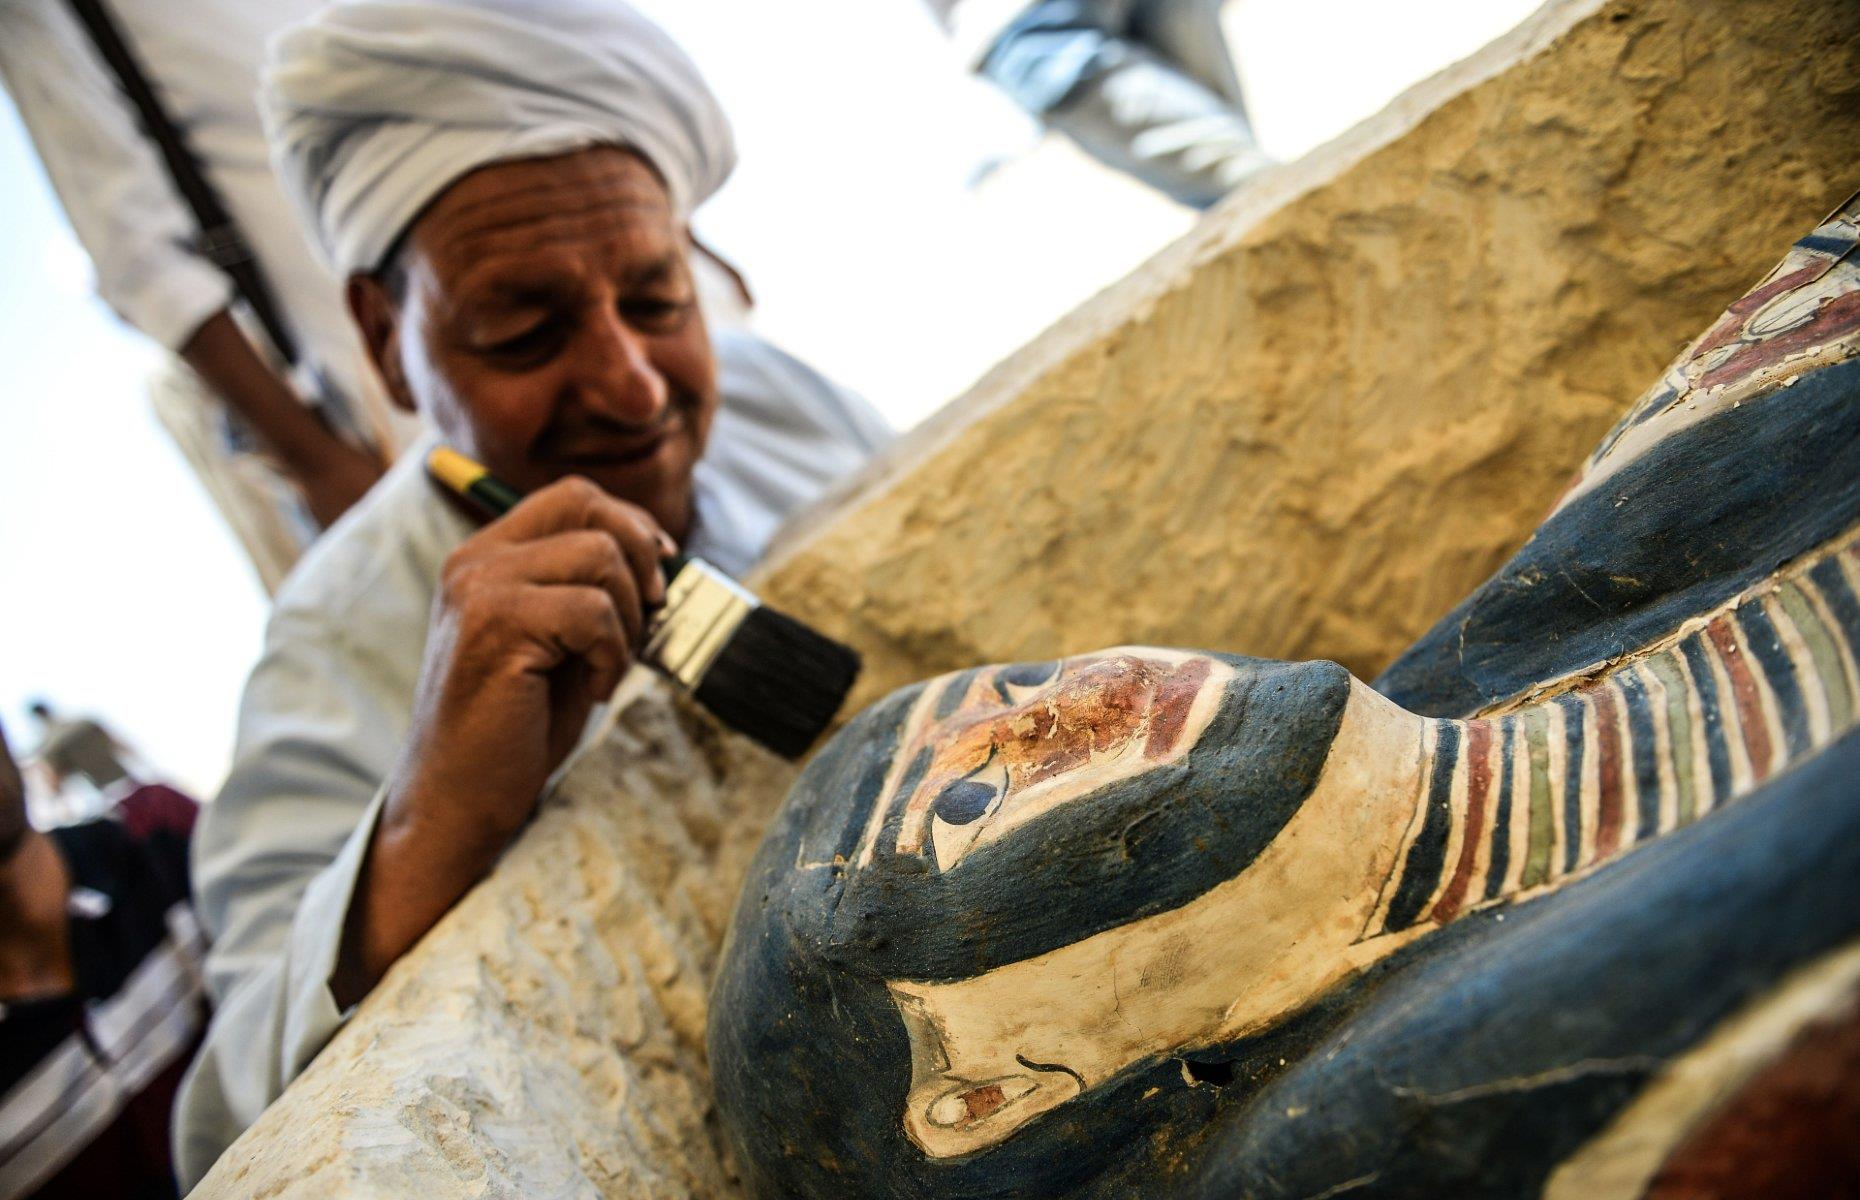 <p>In 2019, a number of mummies were located in and around the Bent Pyramid. Most of the mummies were in excellent condition, having been preserved inside stone, clay and wooden sarcophagi. The finds also included a number of funerary masks, all of which dated to the Late Period (664-332 BC) – much later than Sneferu’s 25th century BC reign. The Late Period is widely considered one of the last eras of true Egyptian rule before the Persians invaded around 525 BC.</p>